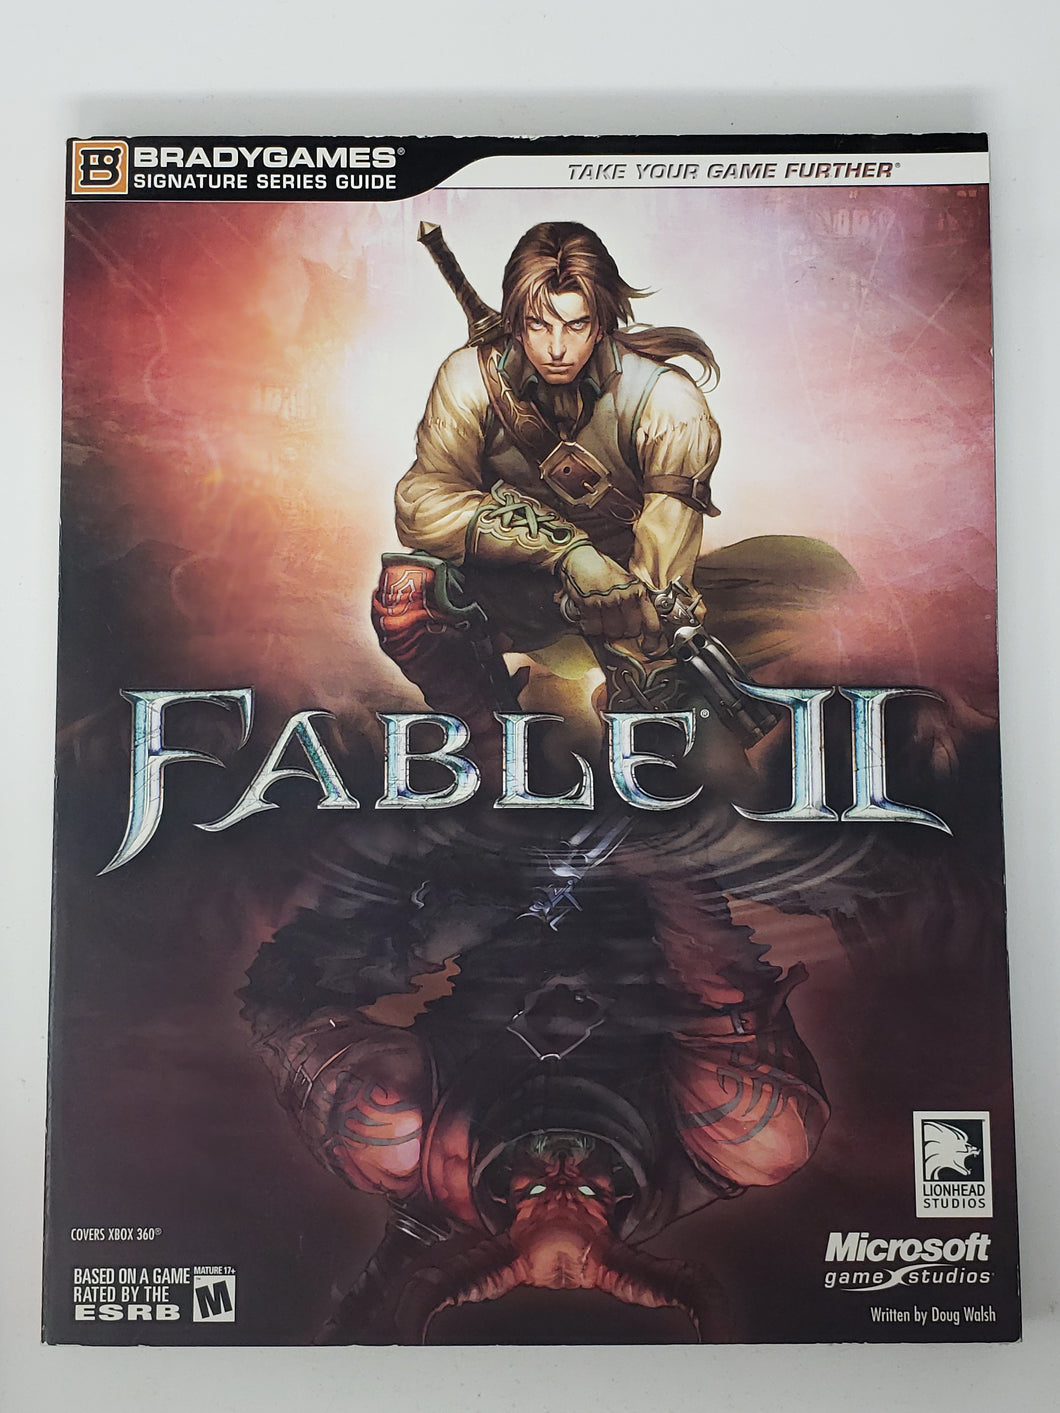 Fable II [BradyGames] - Strategy Guide